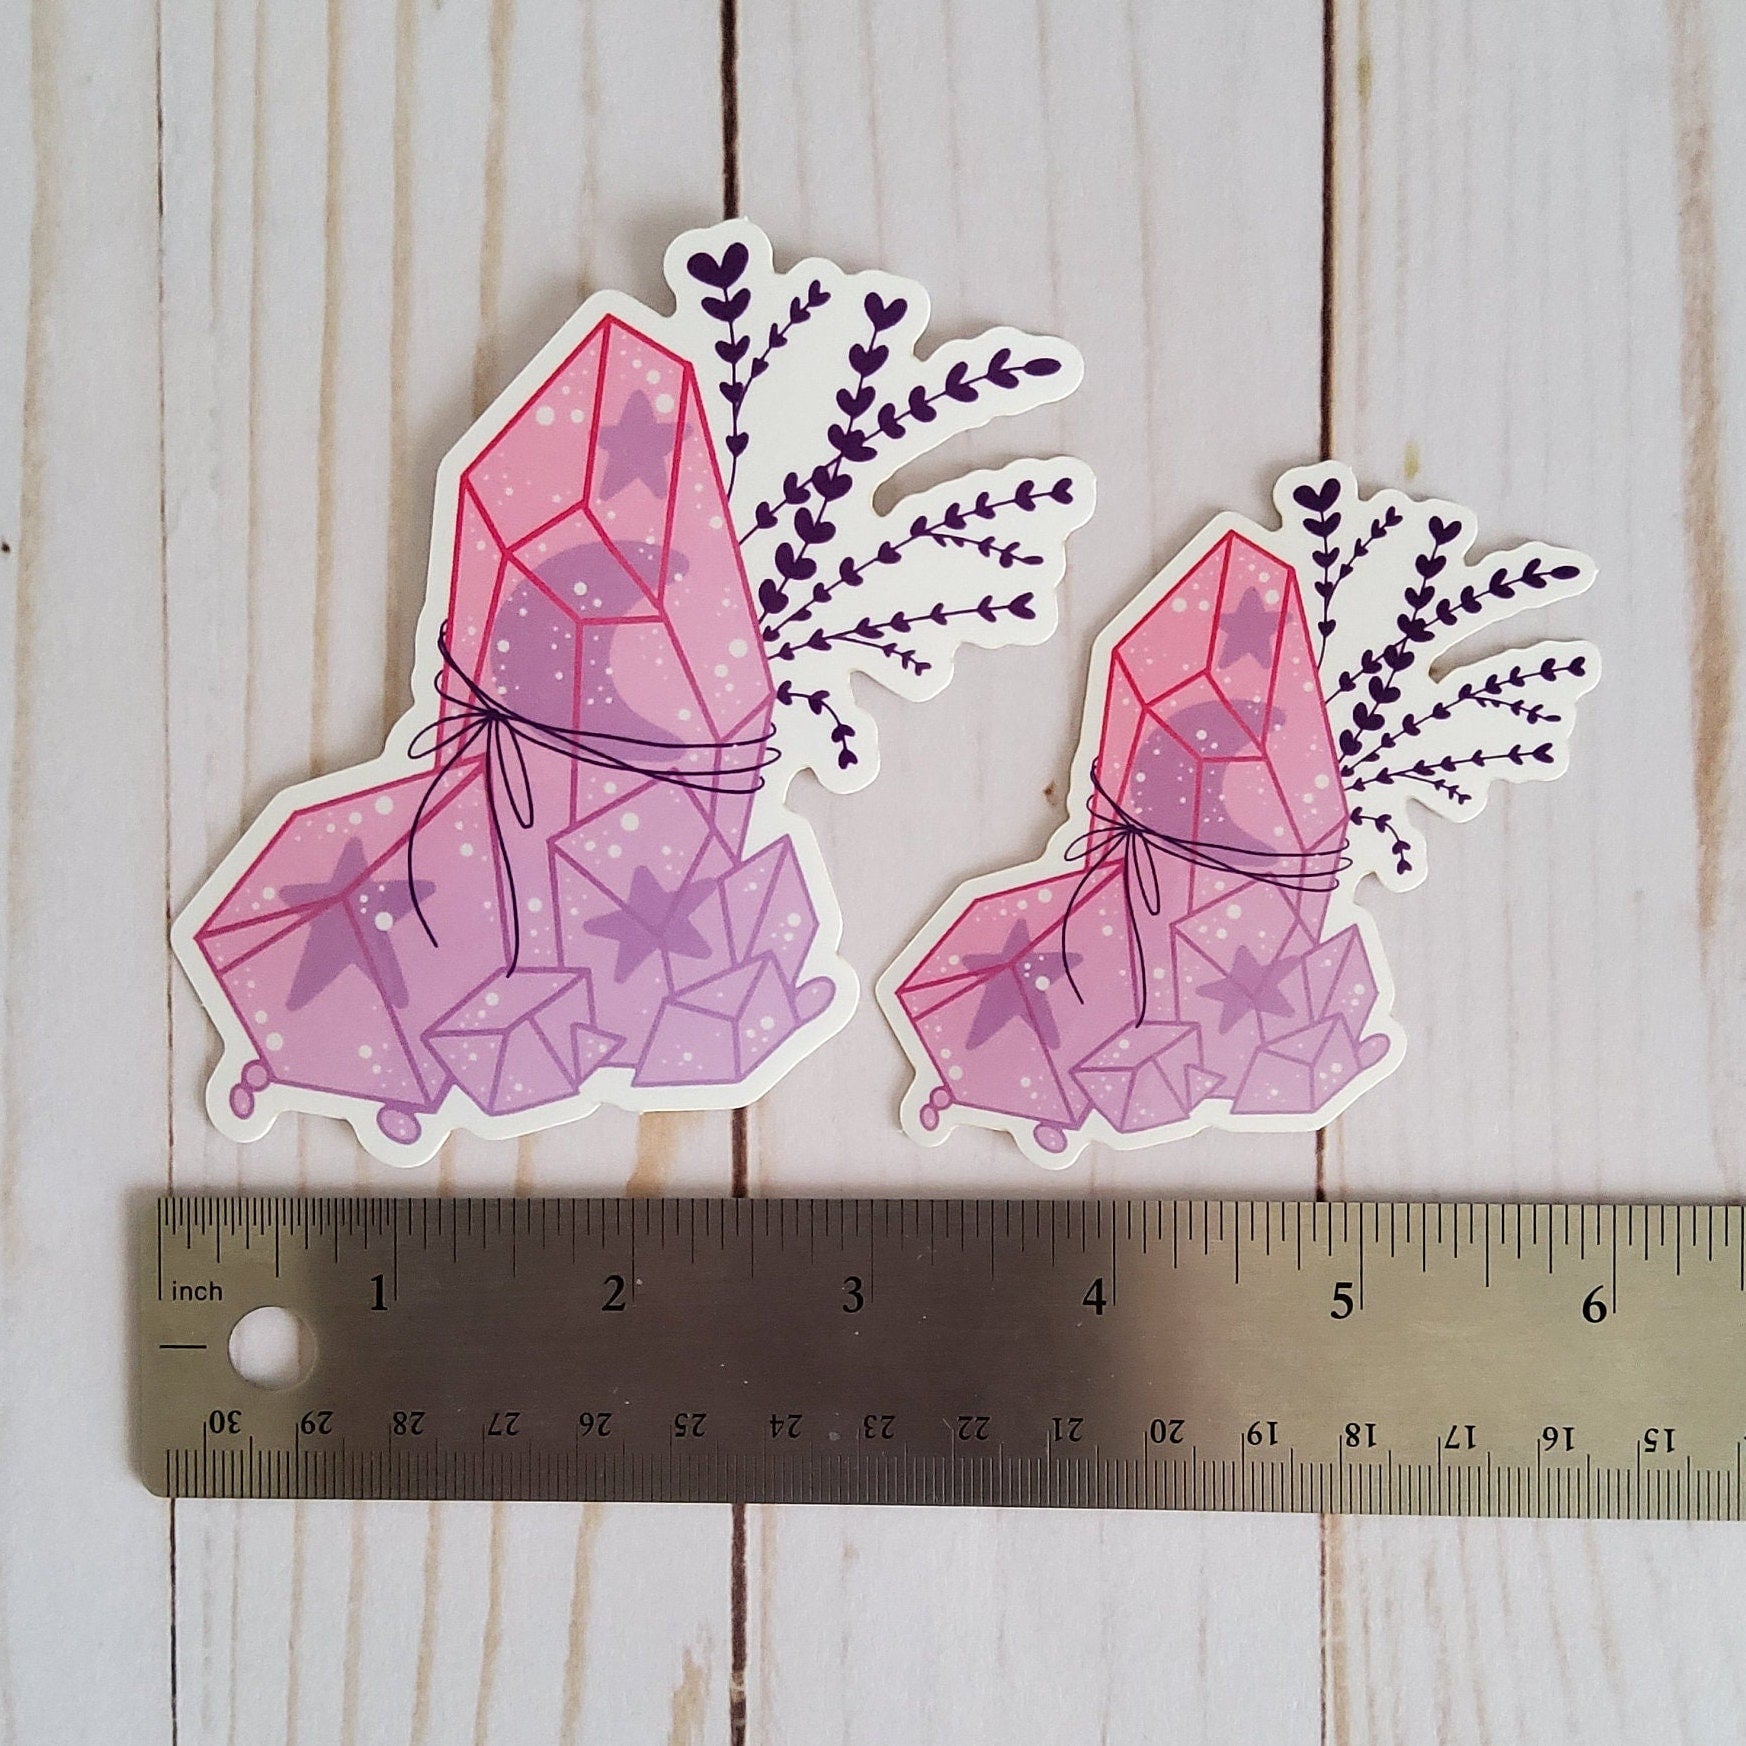 GLOSSY STICKER: Pastel Purple and Pink Crystal Sticker , Pastel Crystal Sticker , Crystal Sticker , Witchy Crystal Sticker , Crystals